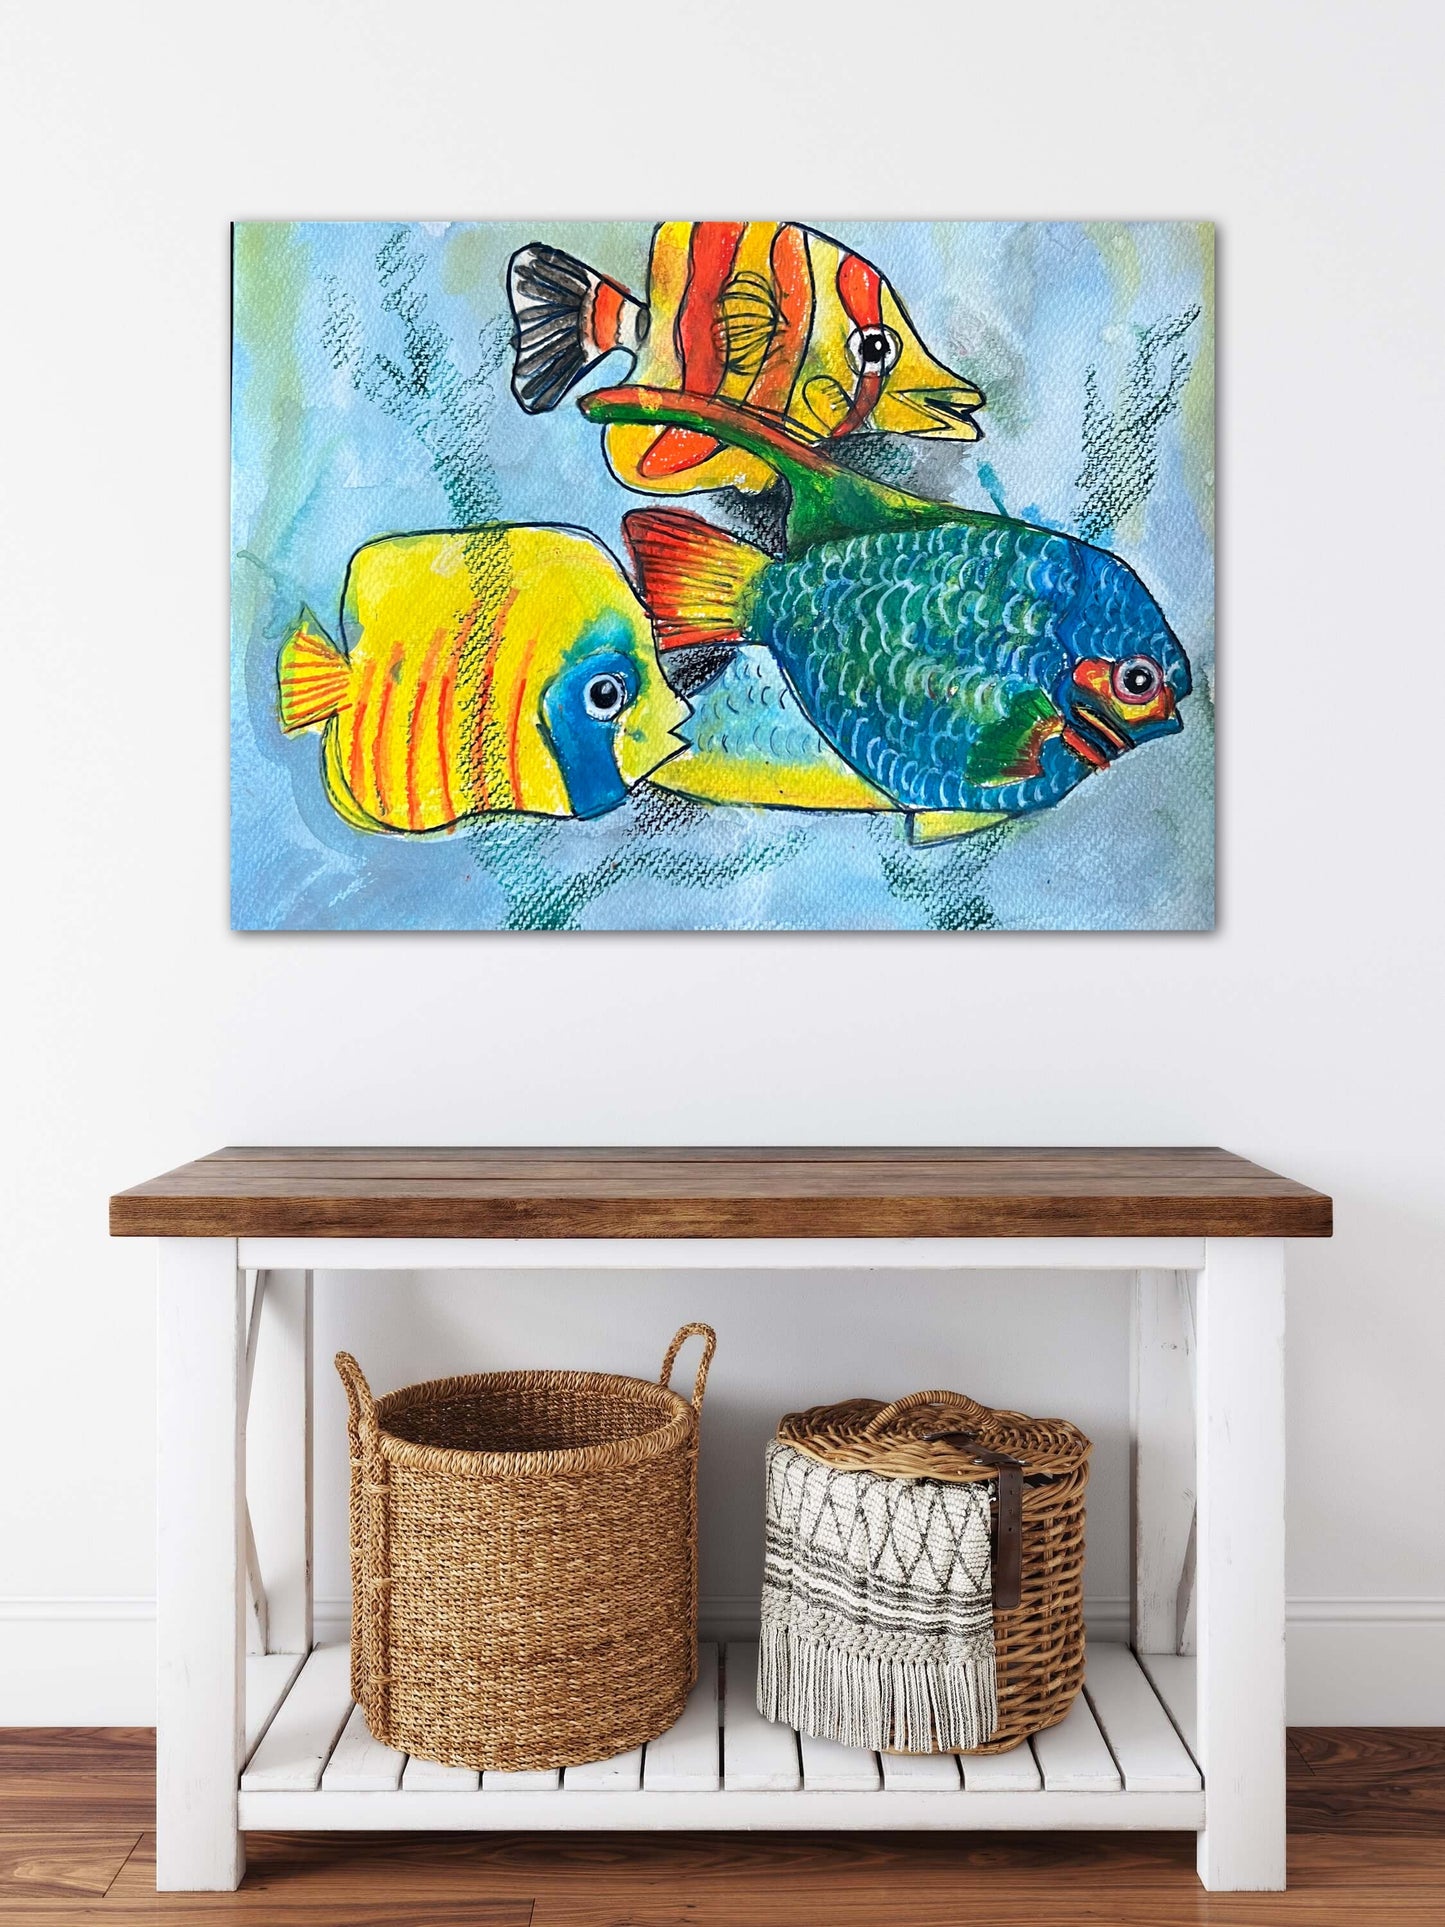 Three Colorful Fish - Print, Poster or Stretched Canvas Print in more sizes